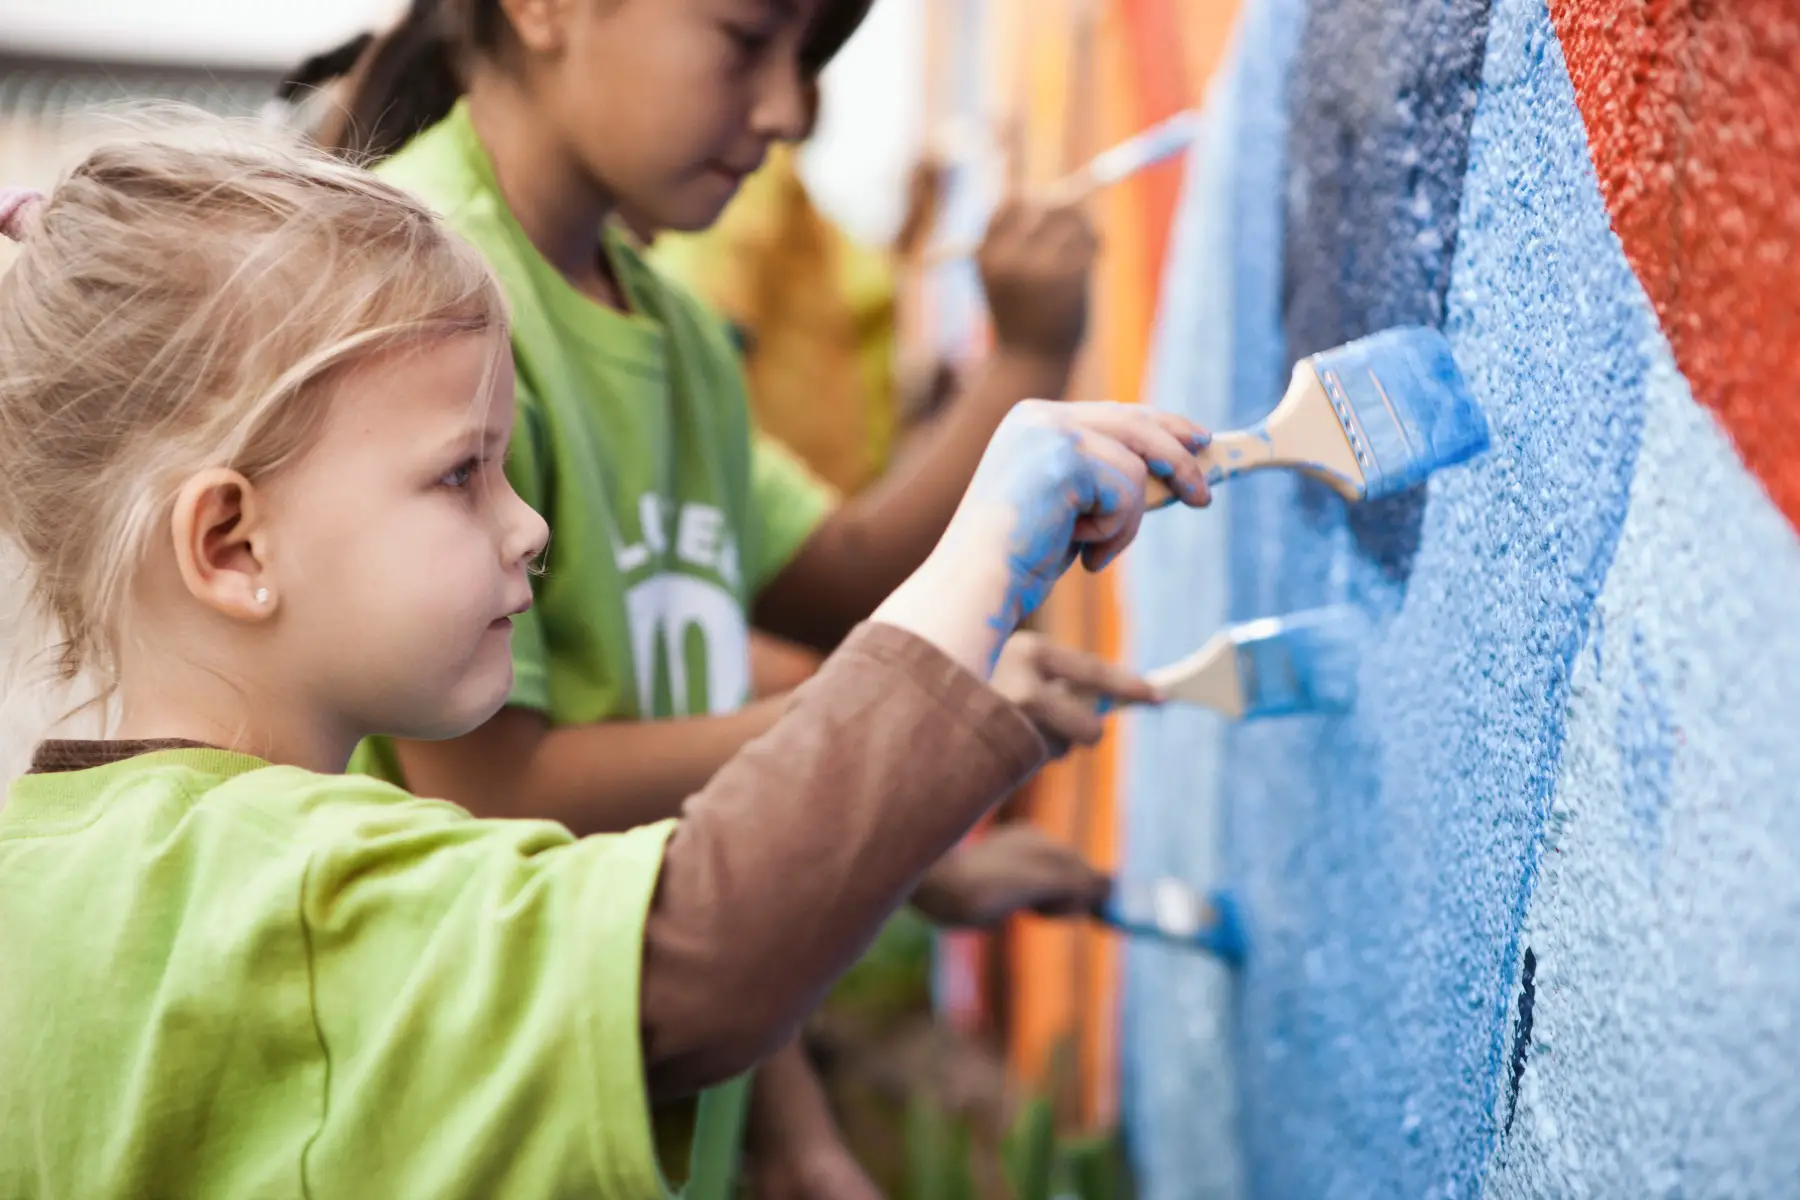 a profile shot of two little girls wearing green t-shirts and painting a wall with colorful paints